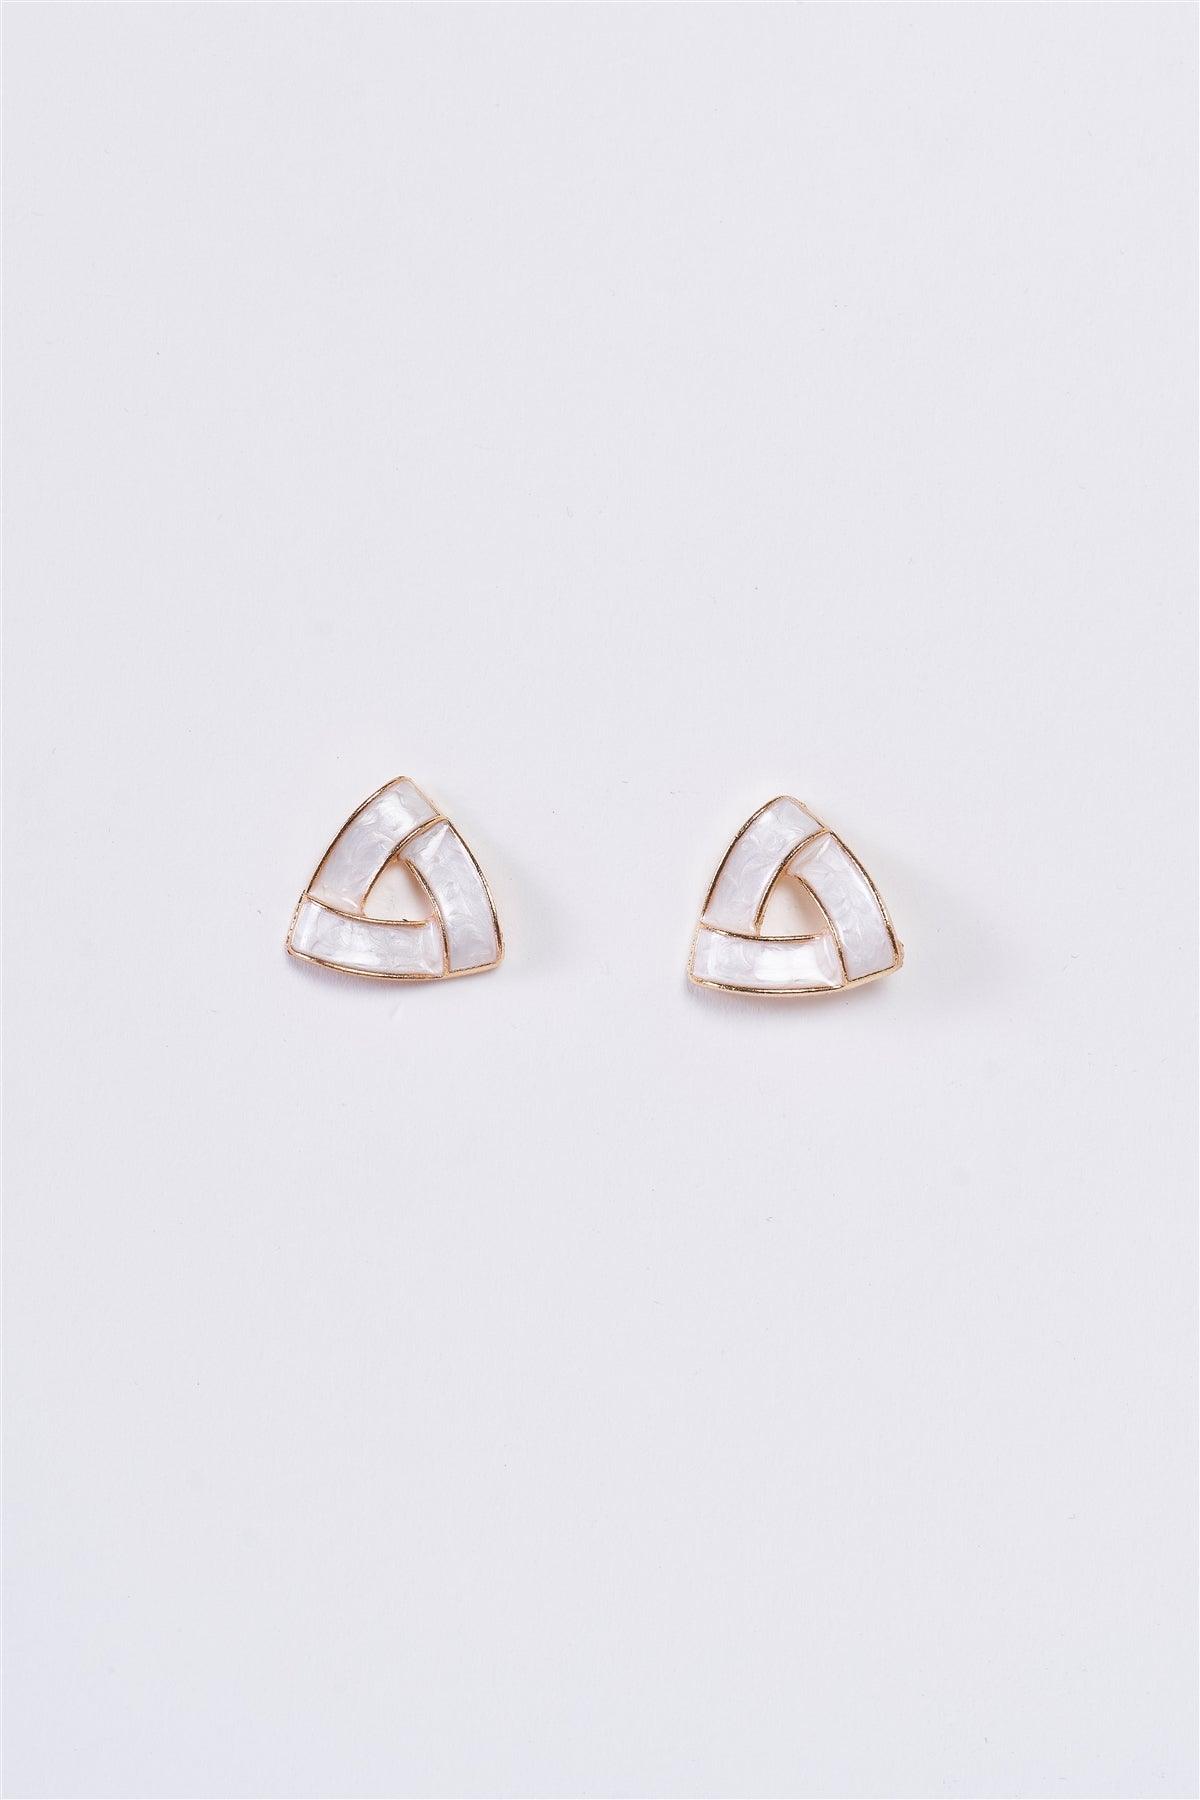 Penrose Triangle Shaped Pearl & Gold Stud Earrings /3 Pairs